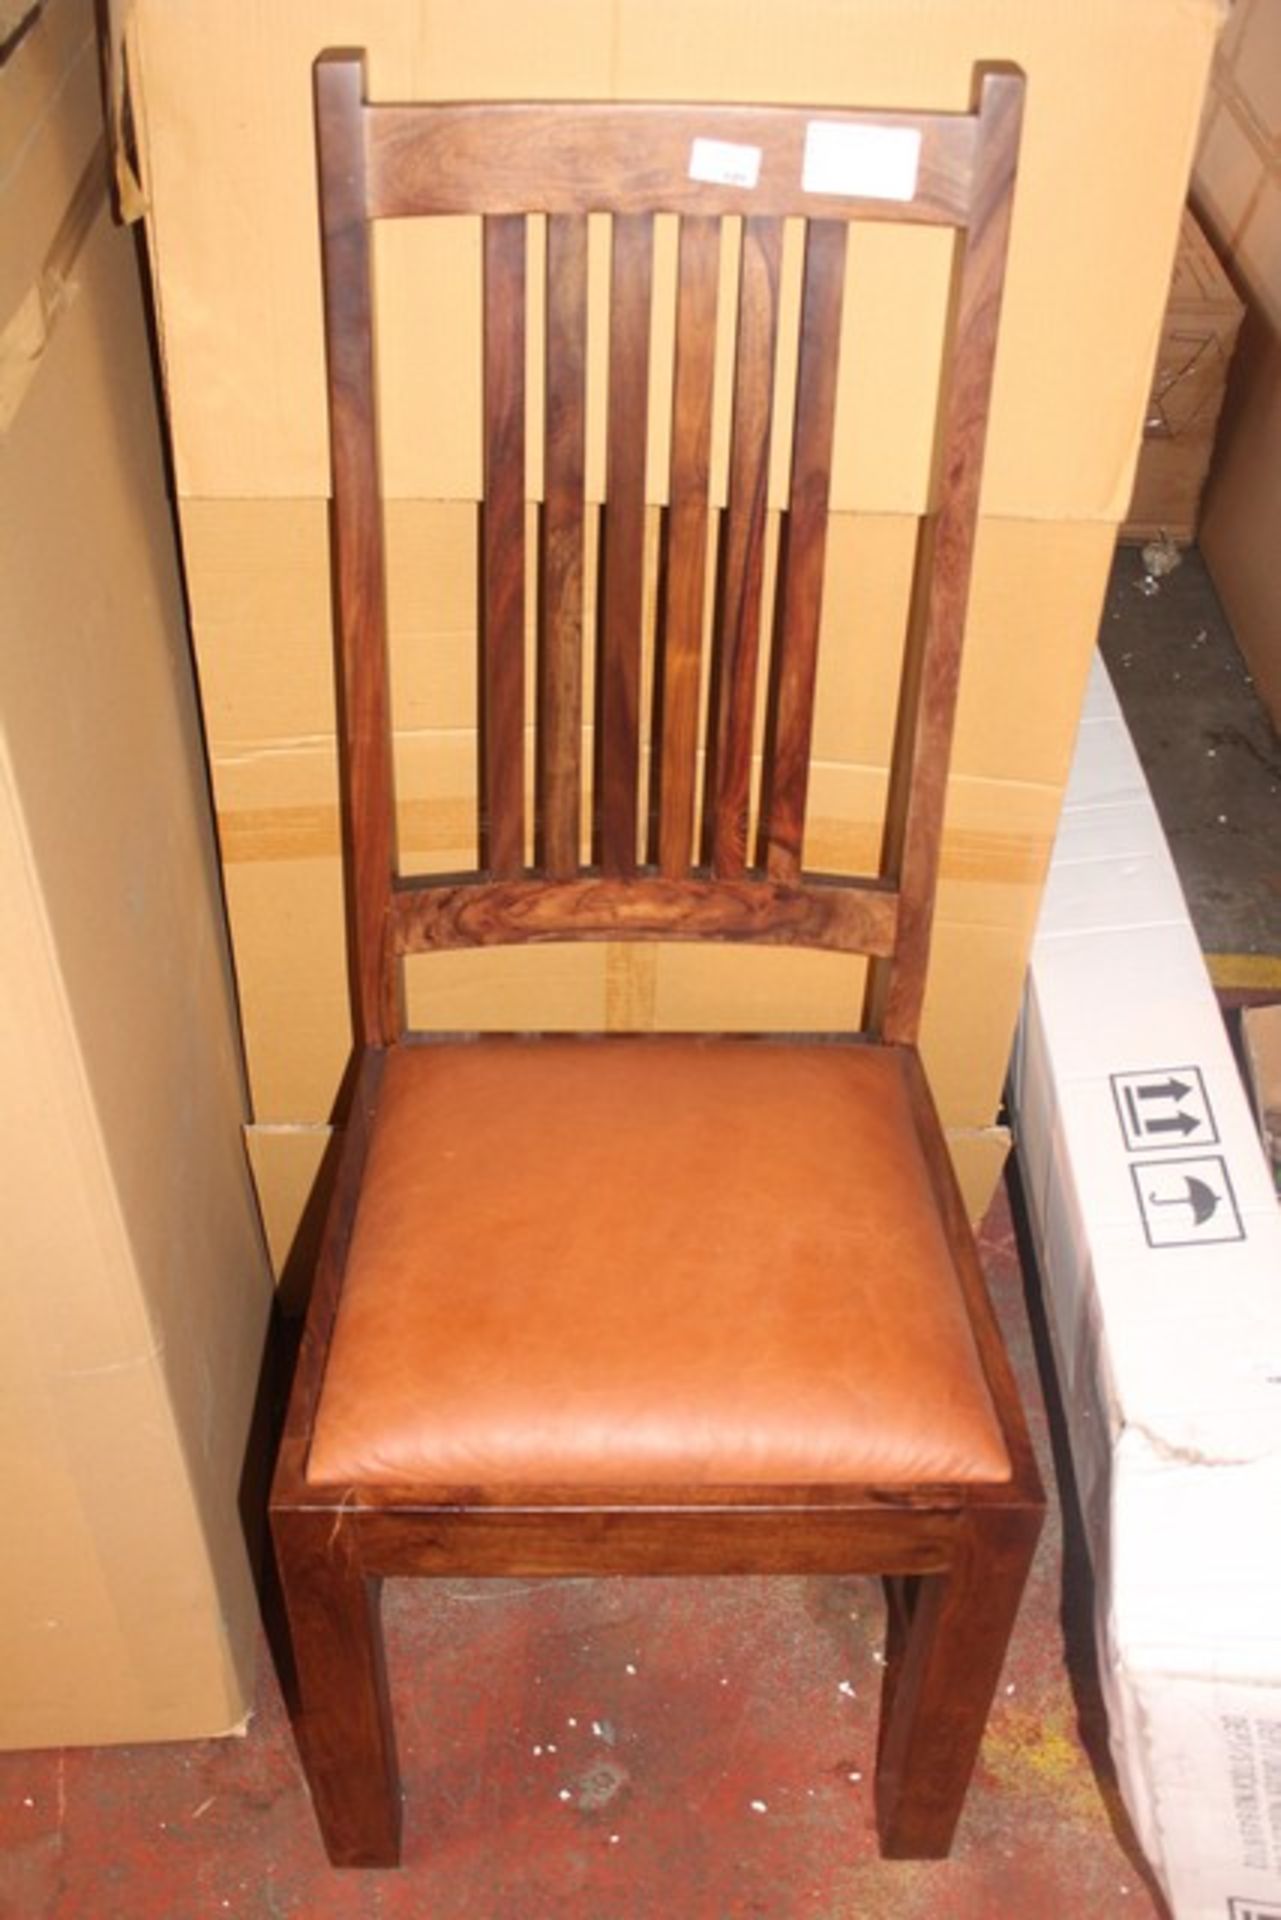 1 x BOXED MAHARANI SOLID WOODEN DINING CHAIRS RRP £175 (6828)  *PLEASE NOTE THAT THE BID PRICE IS